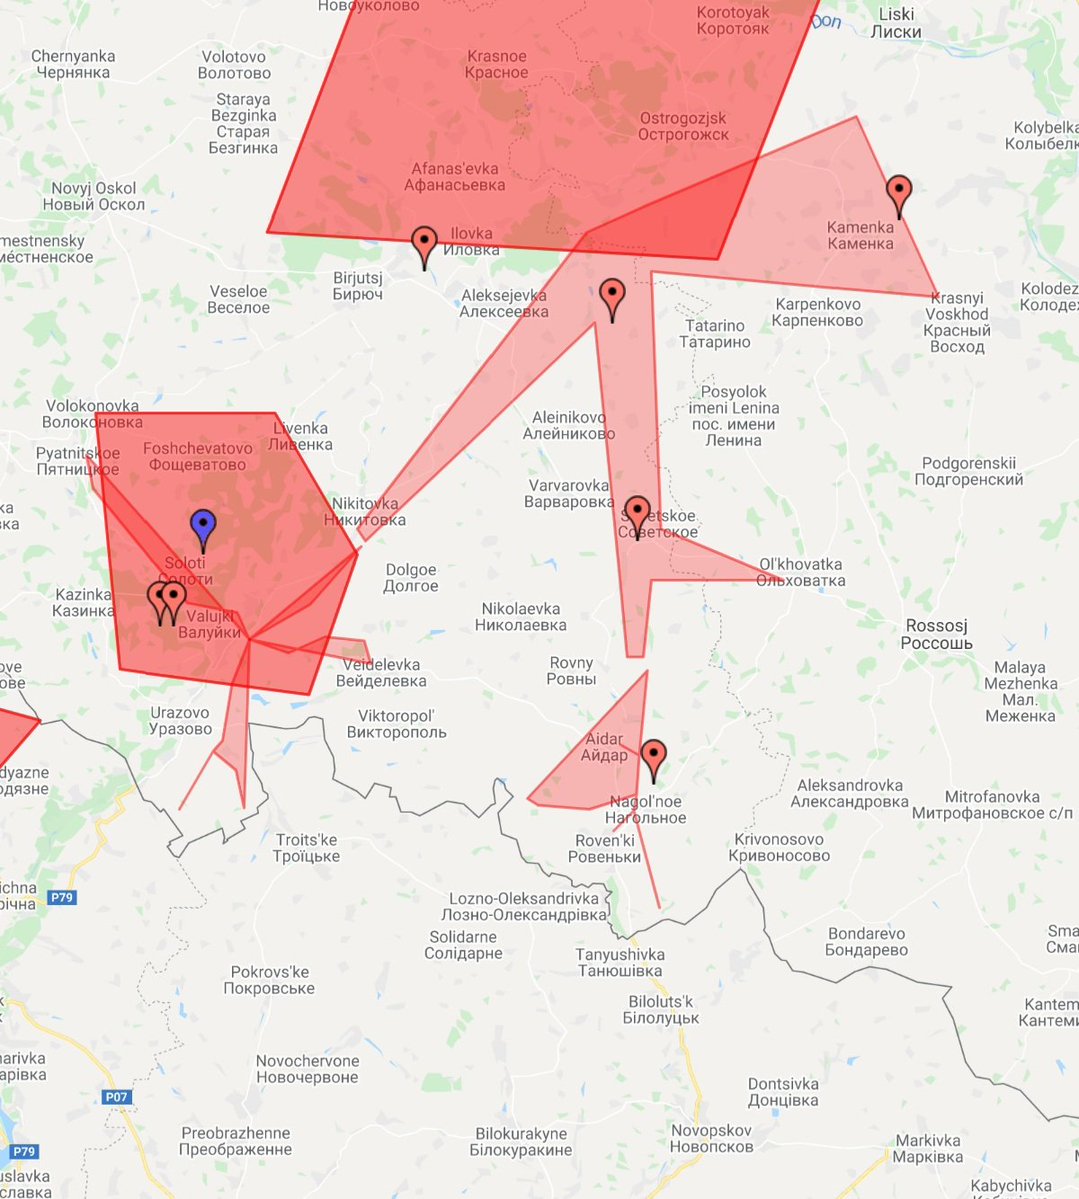 Some days ago, a host of strange NOTAMs were issued for the Voronezh, Valuyki and Boguchar areas